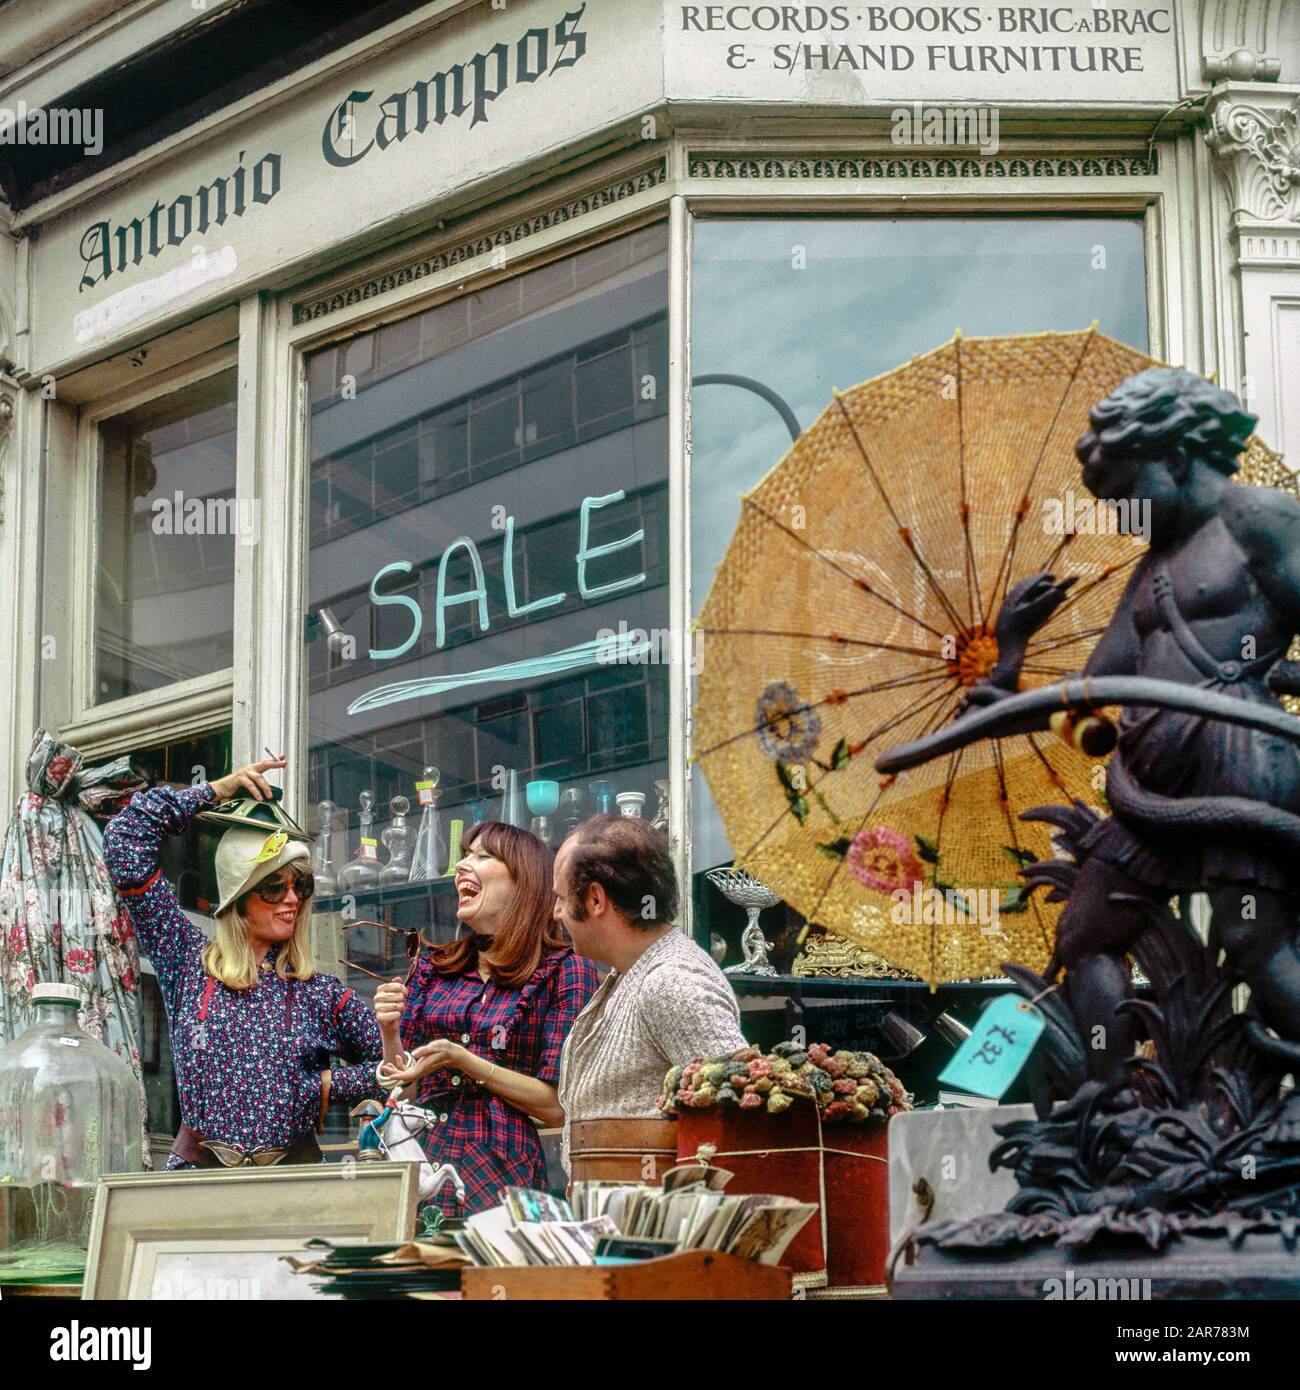 London 1970s, two women having fun with merchant while shopping at antiques store, Kensington, England, UK, GB, Great Britain, Stock Photo